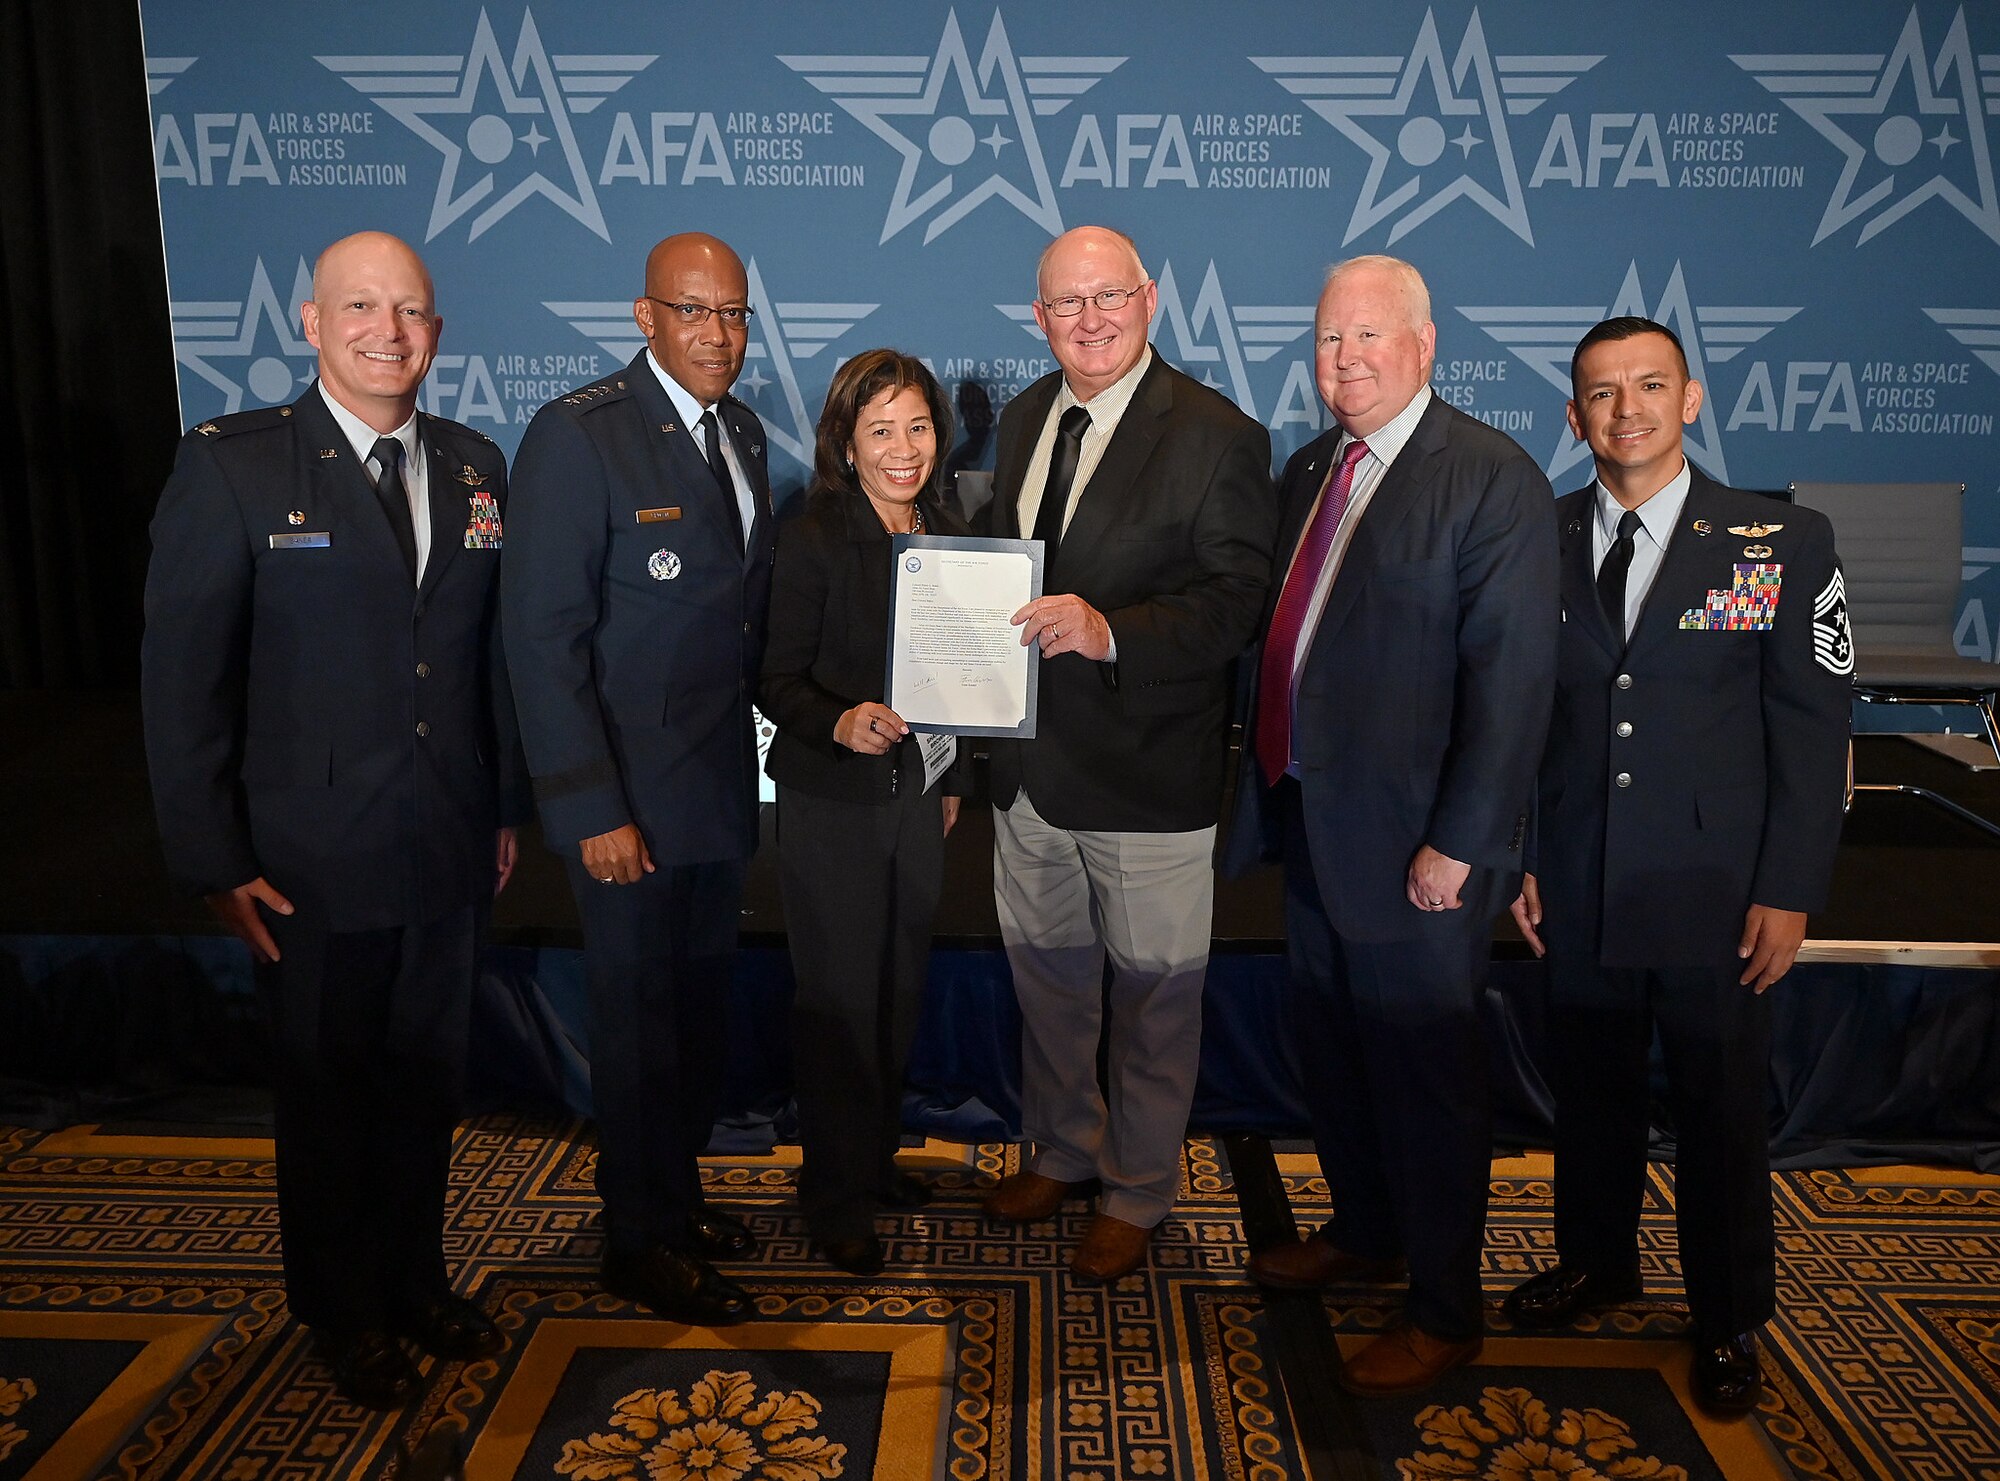 Gen. Charles Q. Brown Jr., (second to the left) Chief of Staff of the Air Force and his wife, Sharene (middle left), present the Community Partnership letter of excellence to Charles Butchee, the Altus Air Force Base Community Partnership Lead, and Dr. Joe Leverett, Chairman of the Altus Military Affairs Committee (second to the right). Col. Blaine Baker (left), 97th Air Mobility Wing (AMW) commander also joined to celebrate the award with Chief MSgt. Cesar Flores, 97th AMW command chief. (U.S. Air Force photo courtesy of Staff Sgt. Chad Trujillo)